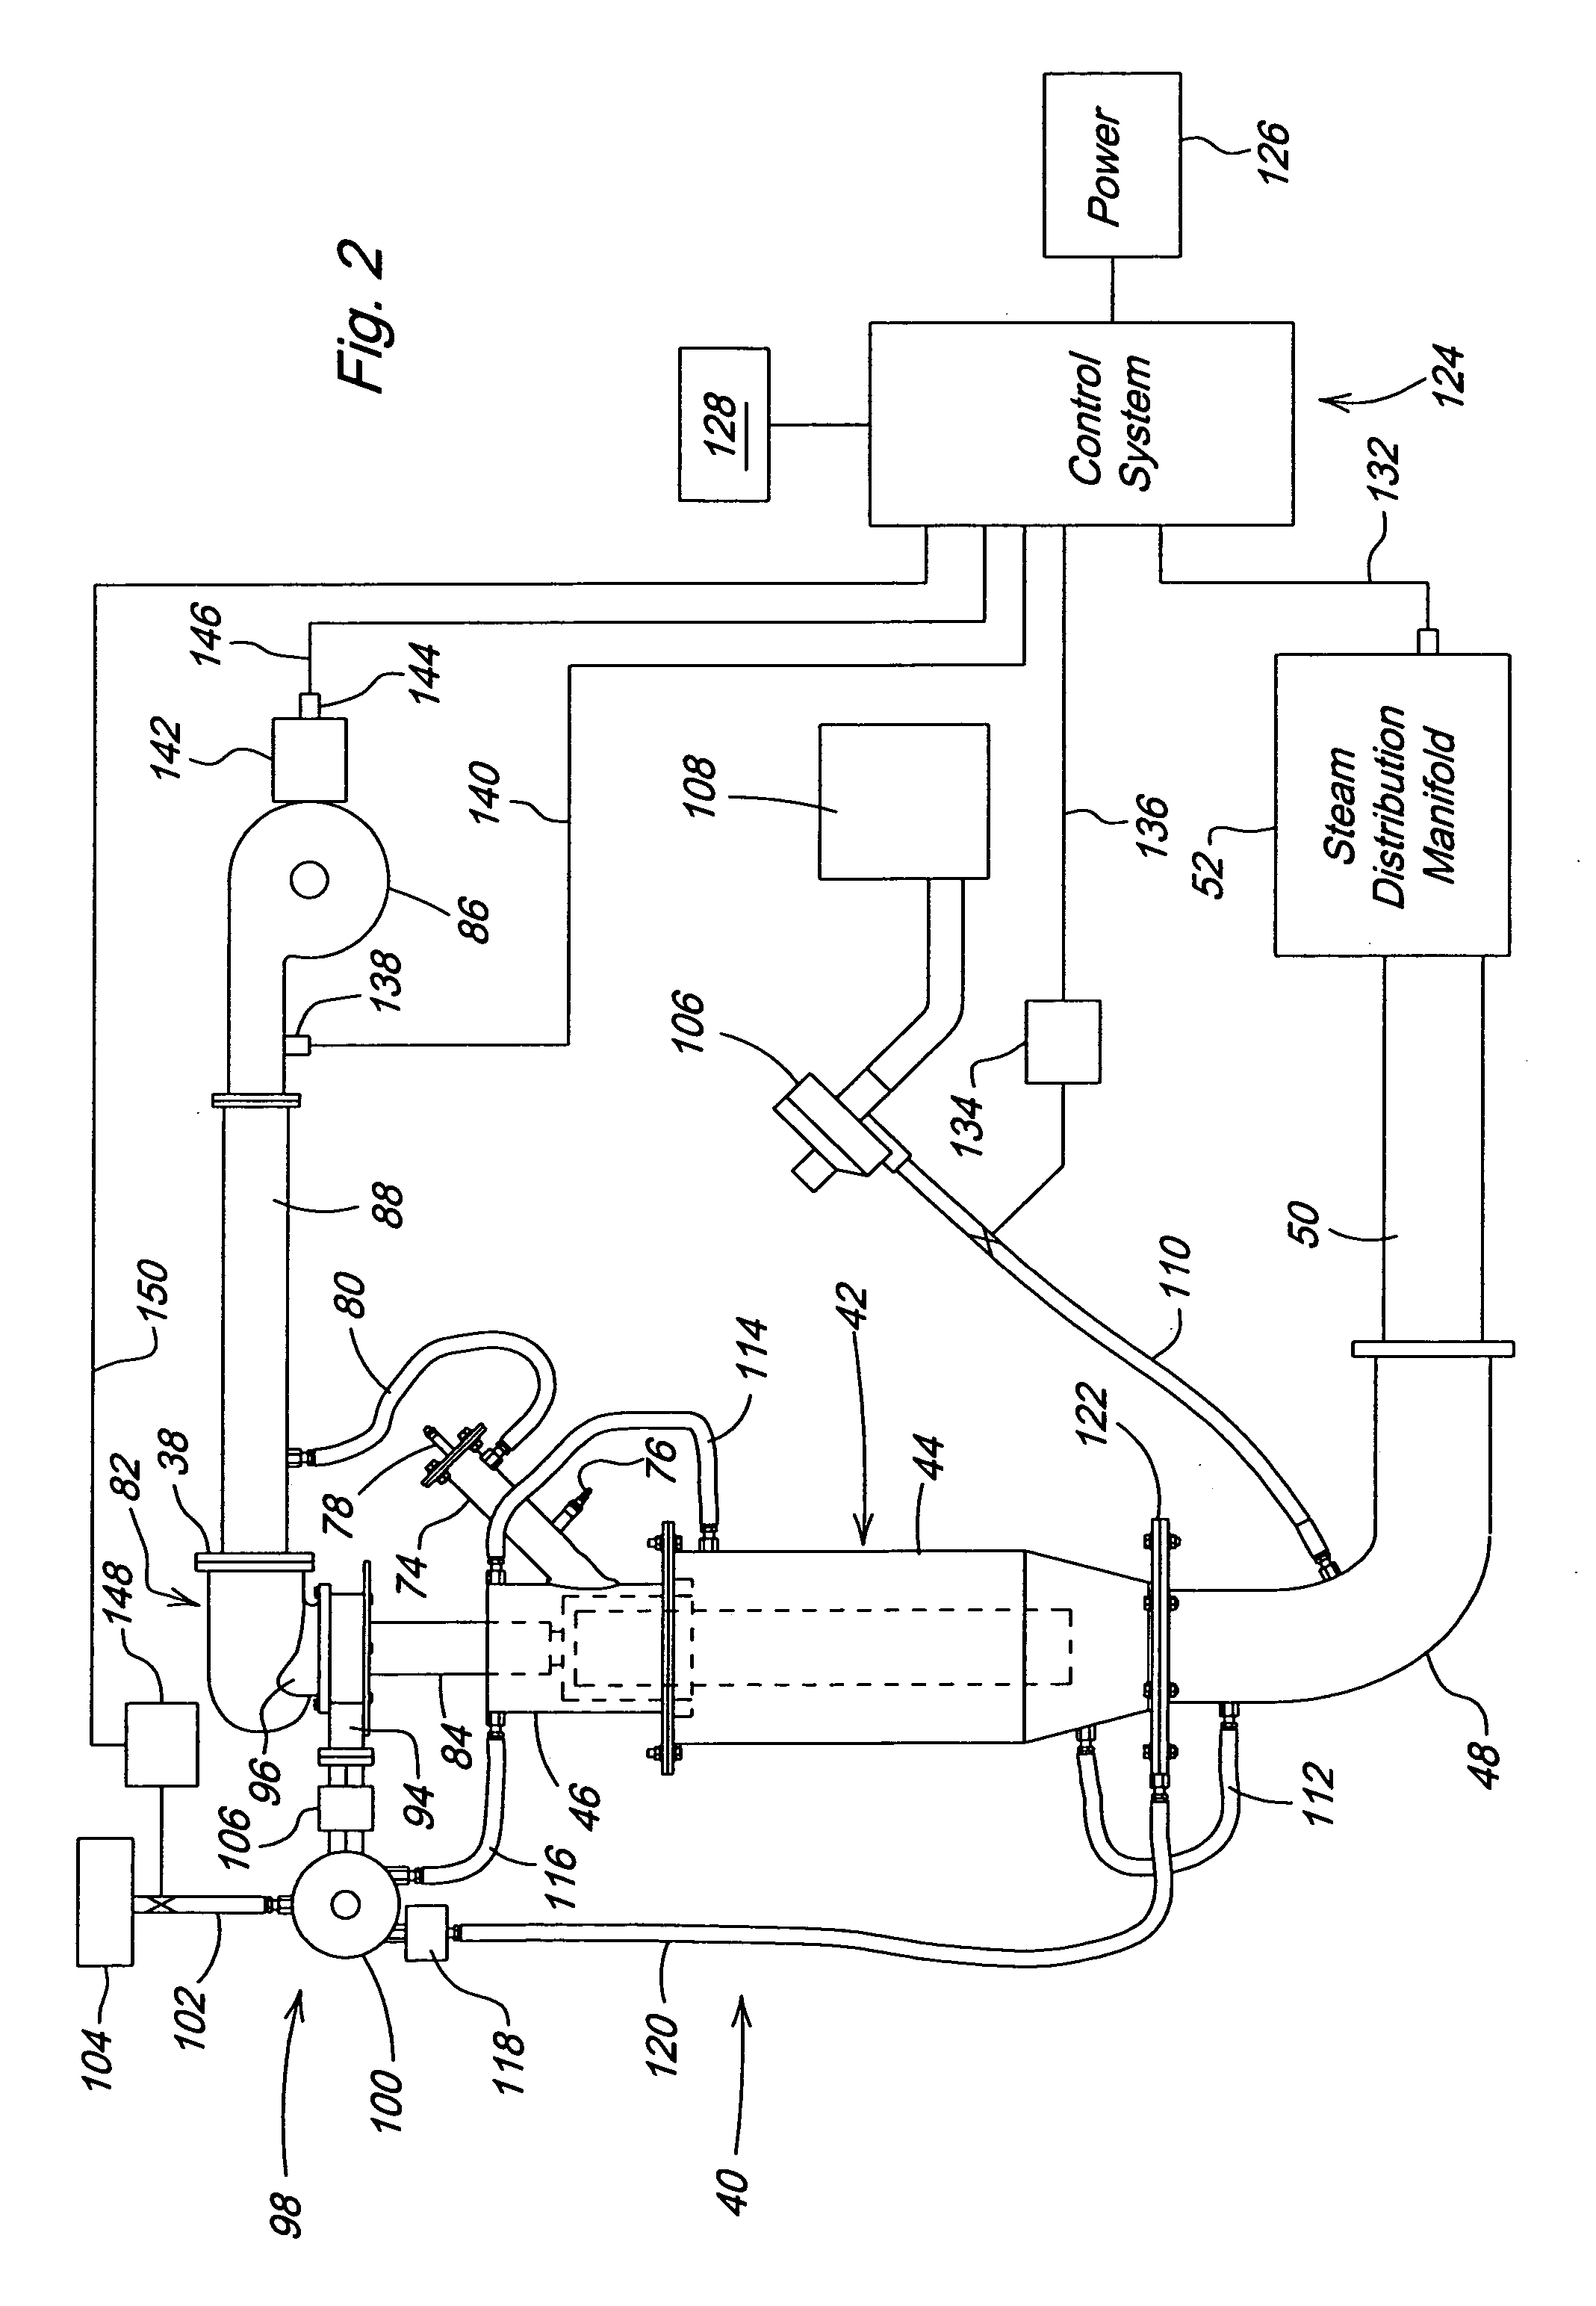 Using an estimated heat output value of a direct-fired steam generator in controlling water flow to maintain a desired constant steam temperature